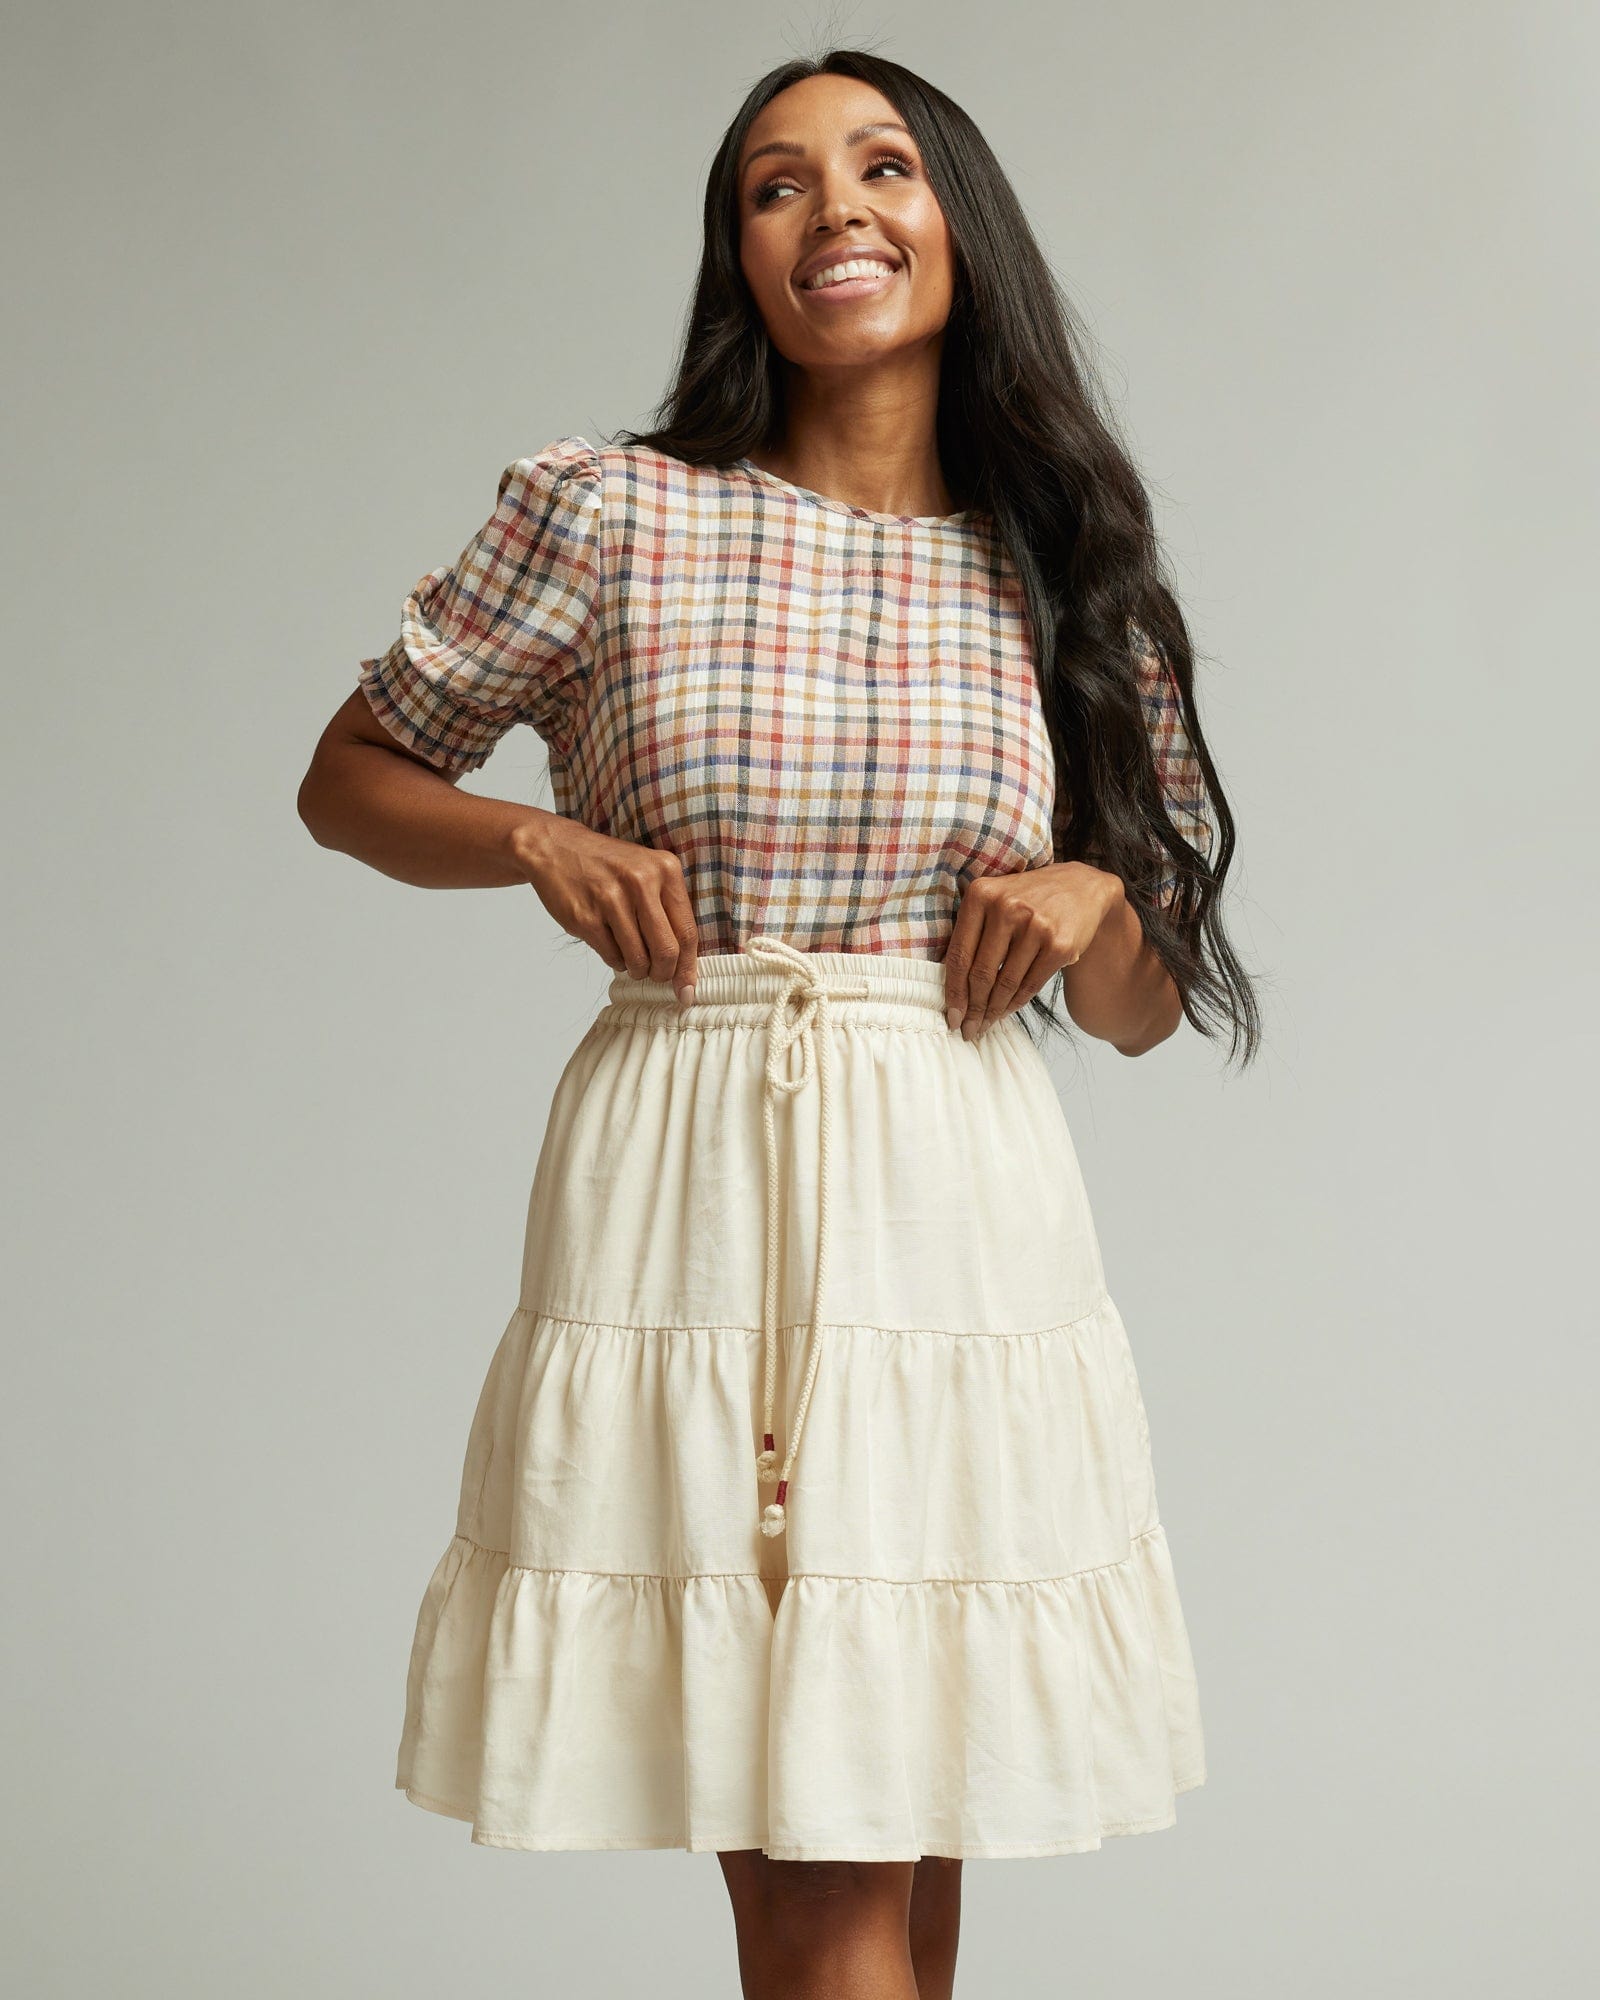 Woman in a white knee-length tiered skirt